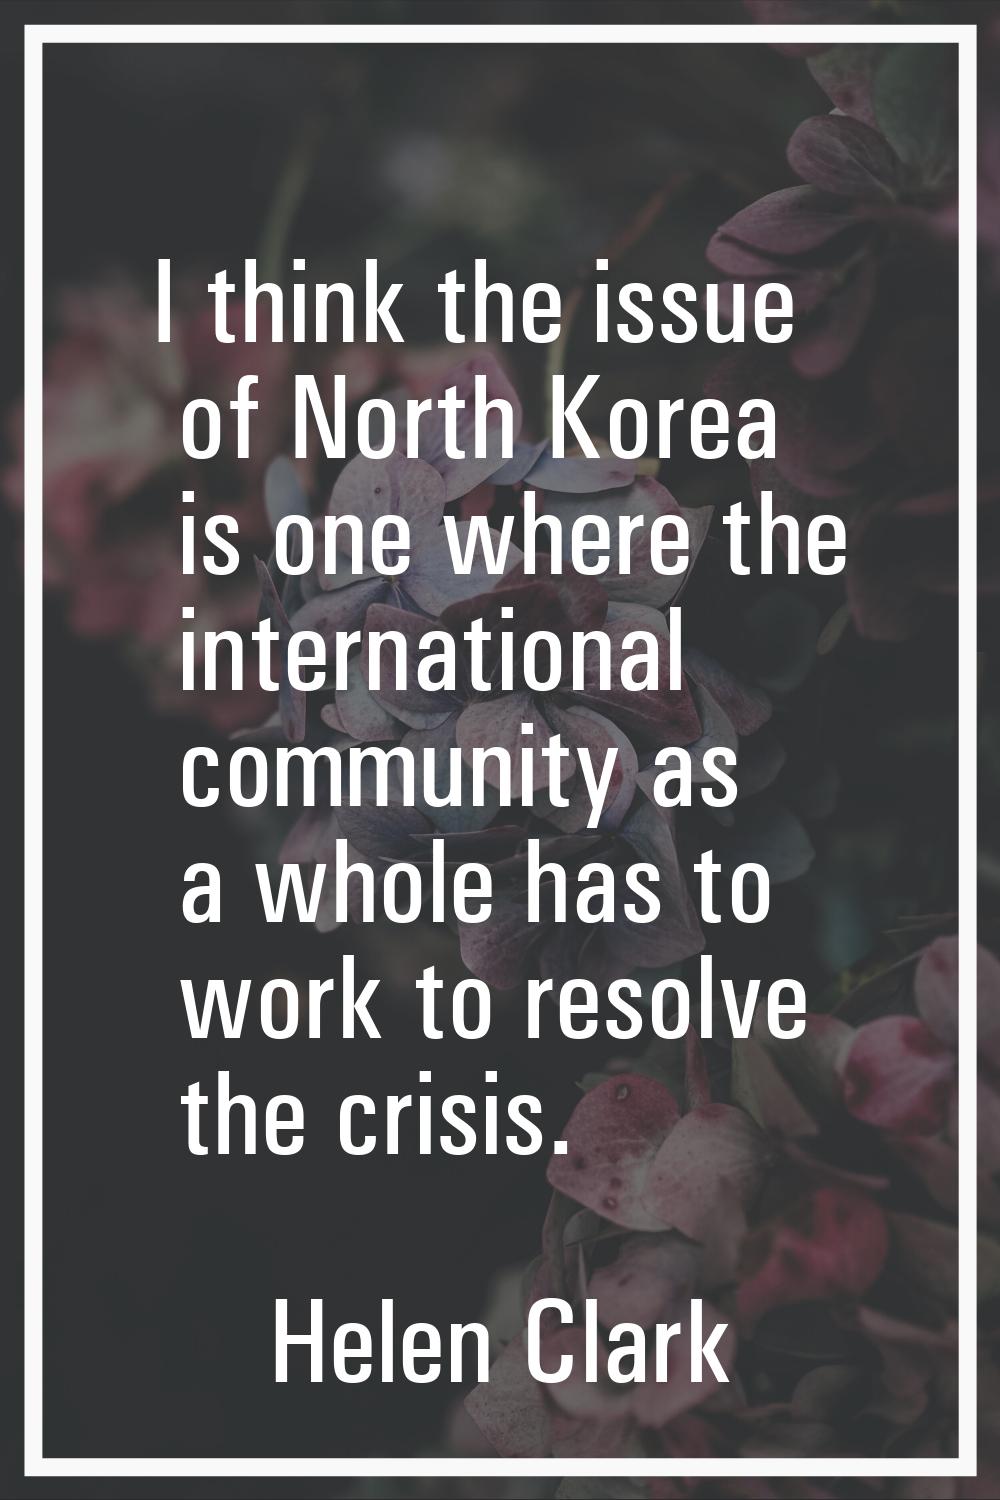 I think the issue of North Korea is one where the international community as a whole has to work to